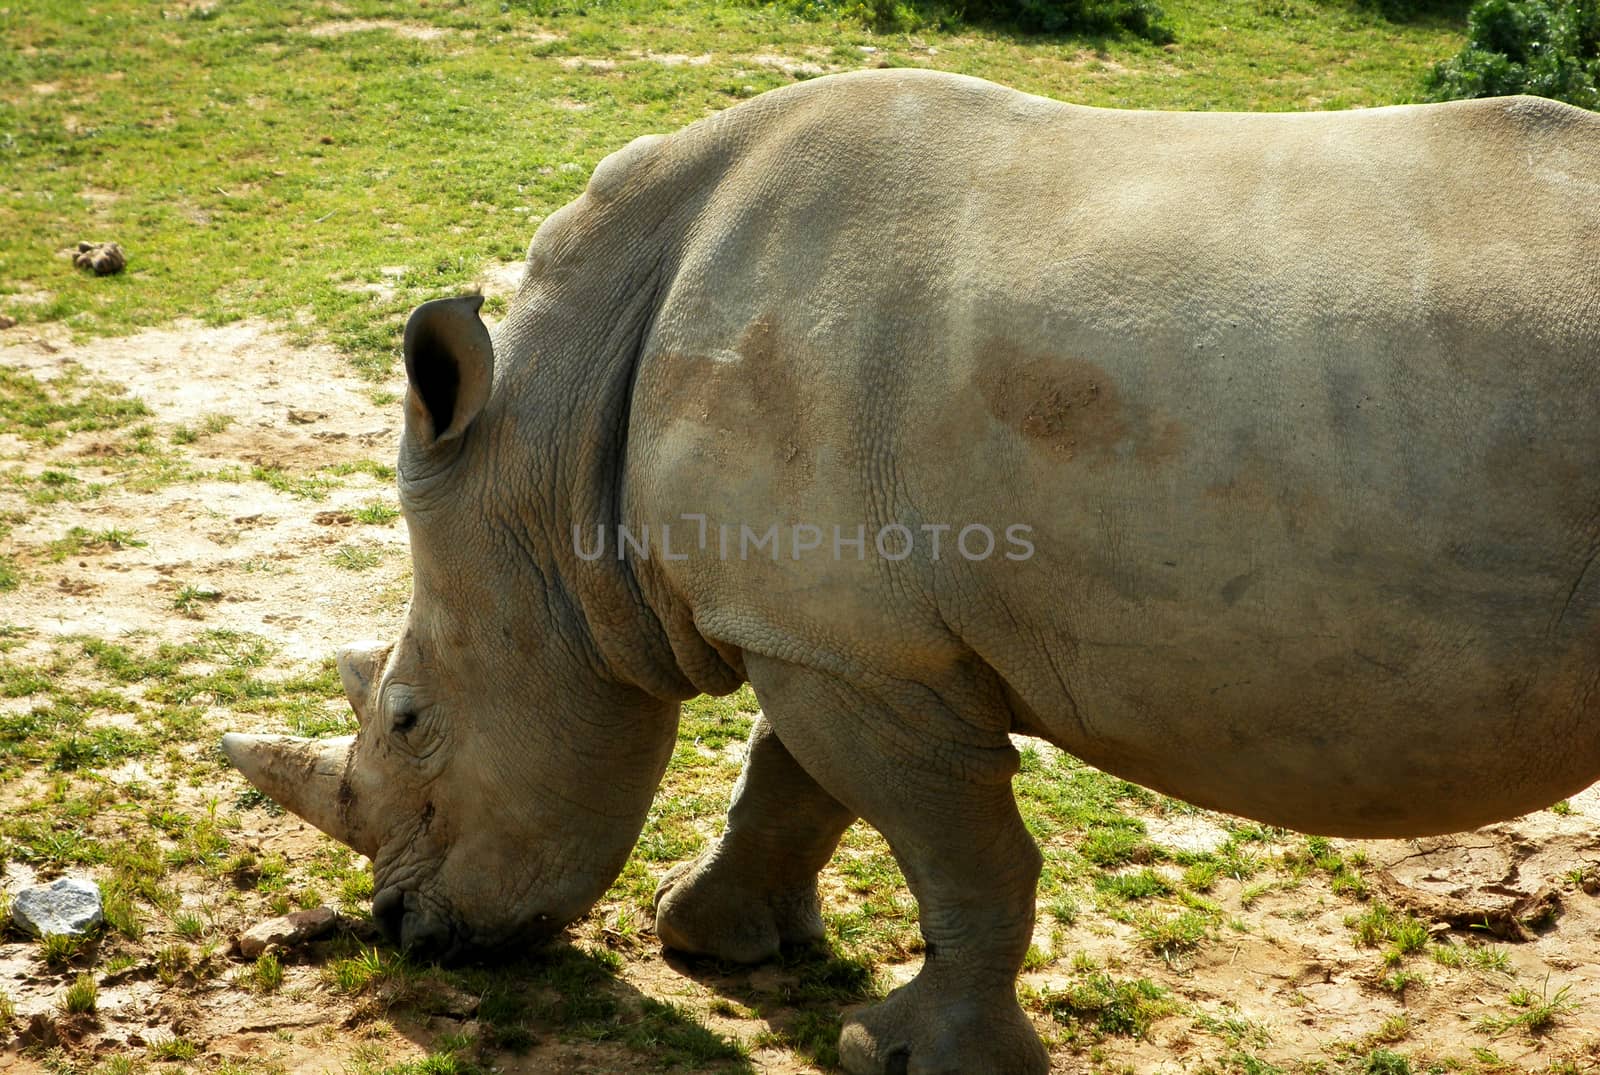 Close up view of a Rhinoceros grazing.

Picture taken on March 13, 2011.